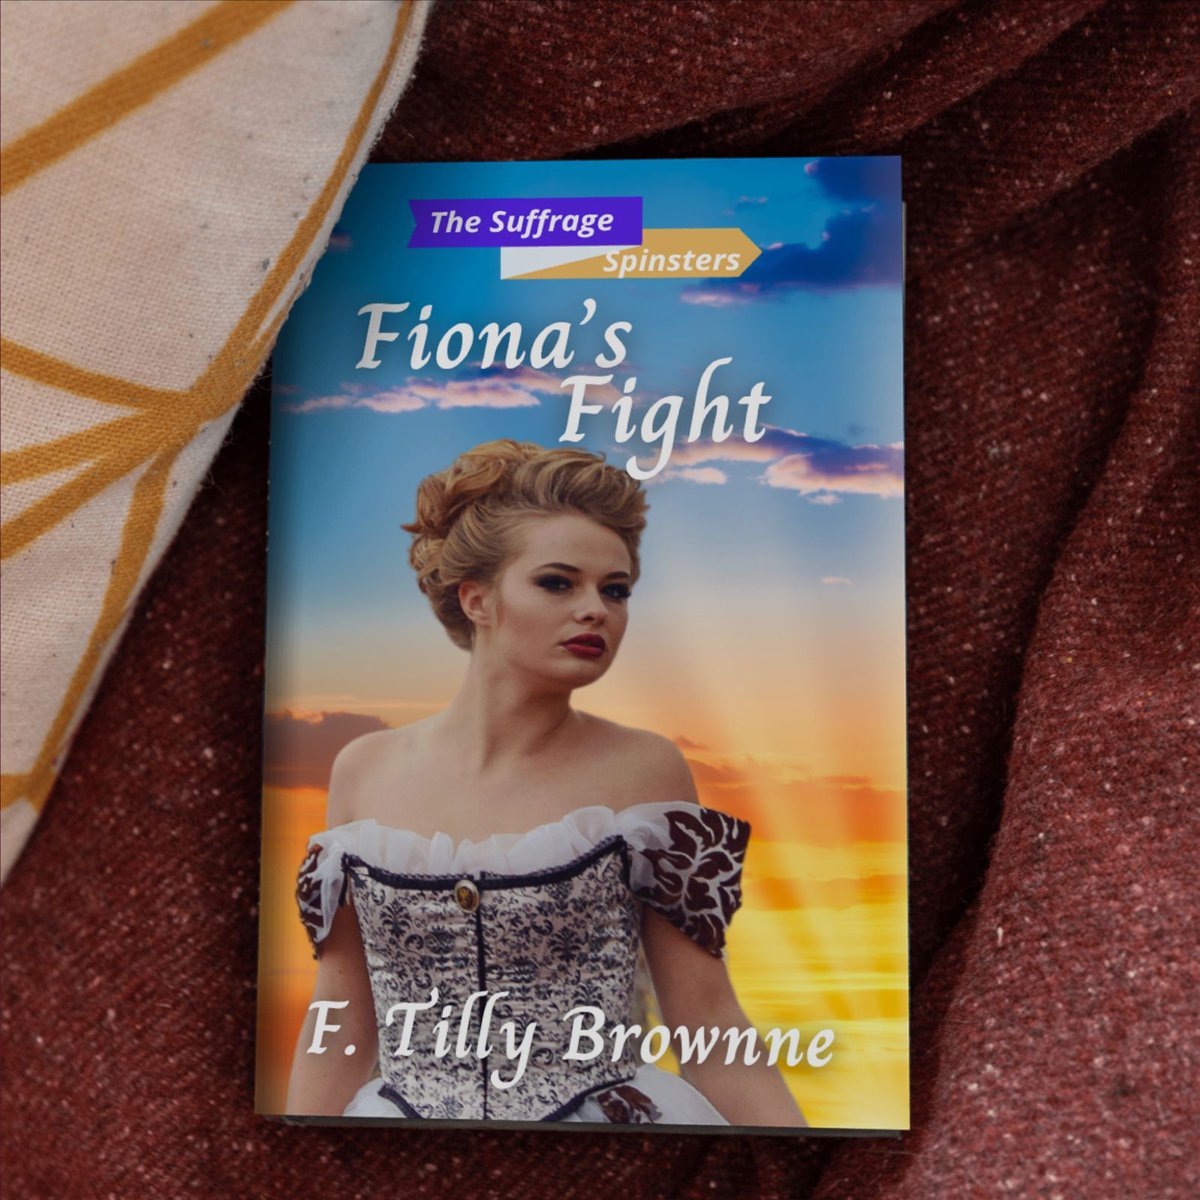 RELEASED! #Order #KU BUY NOW! FIONA'S FIGHT: When the suffragists roll into town, Fiona Fletcher knows where her mother stands: strong feelings against woman’s suffrage. Unfortunately. Will her mother ever speak to her again? #HistoricalRomance buff.ly/496kE9g #IARTG